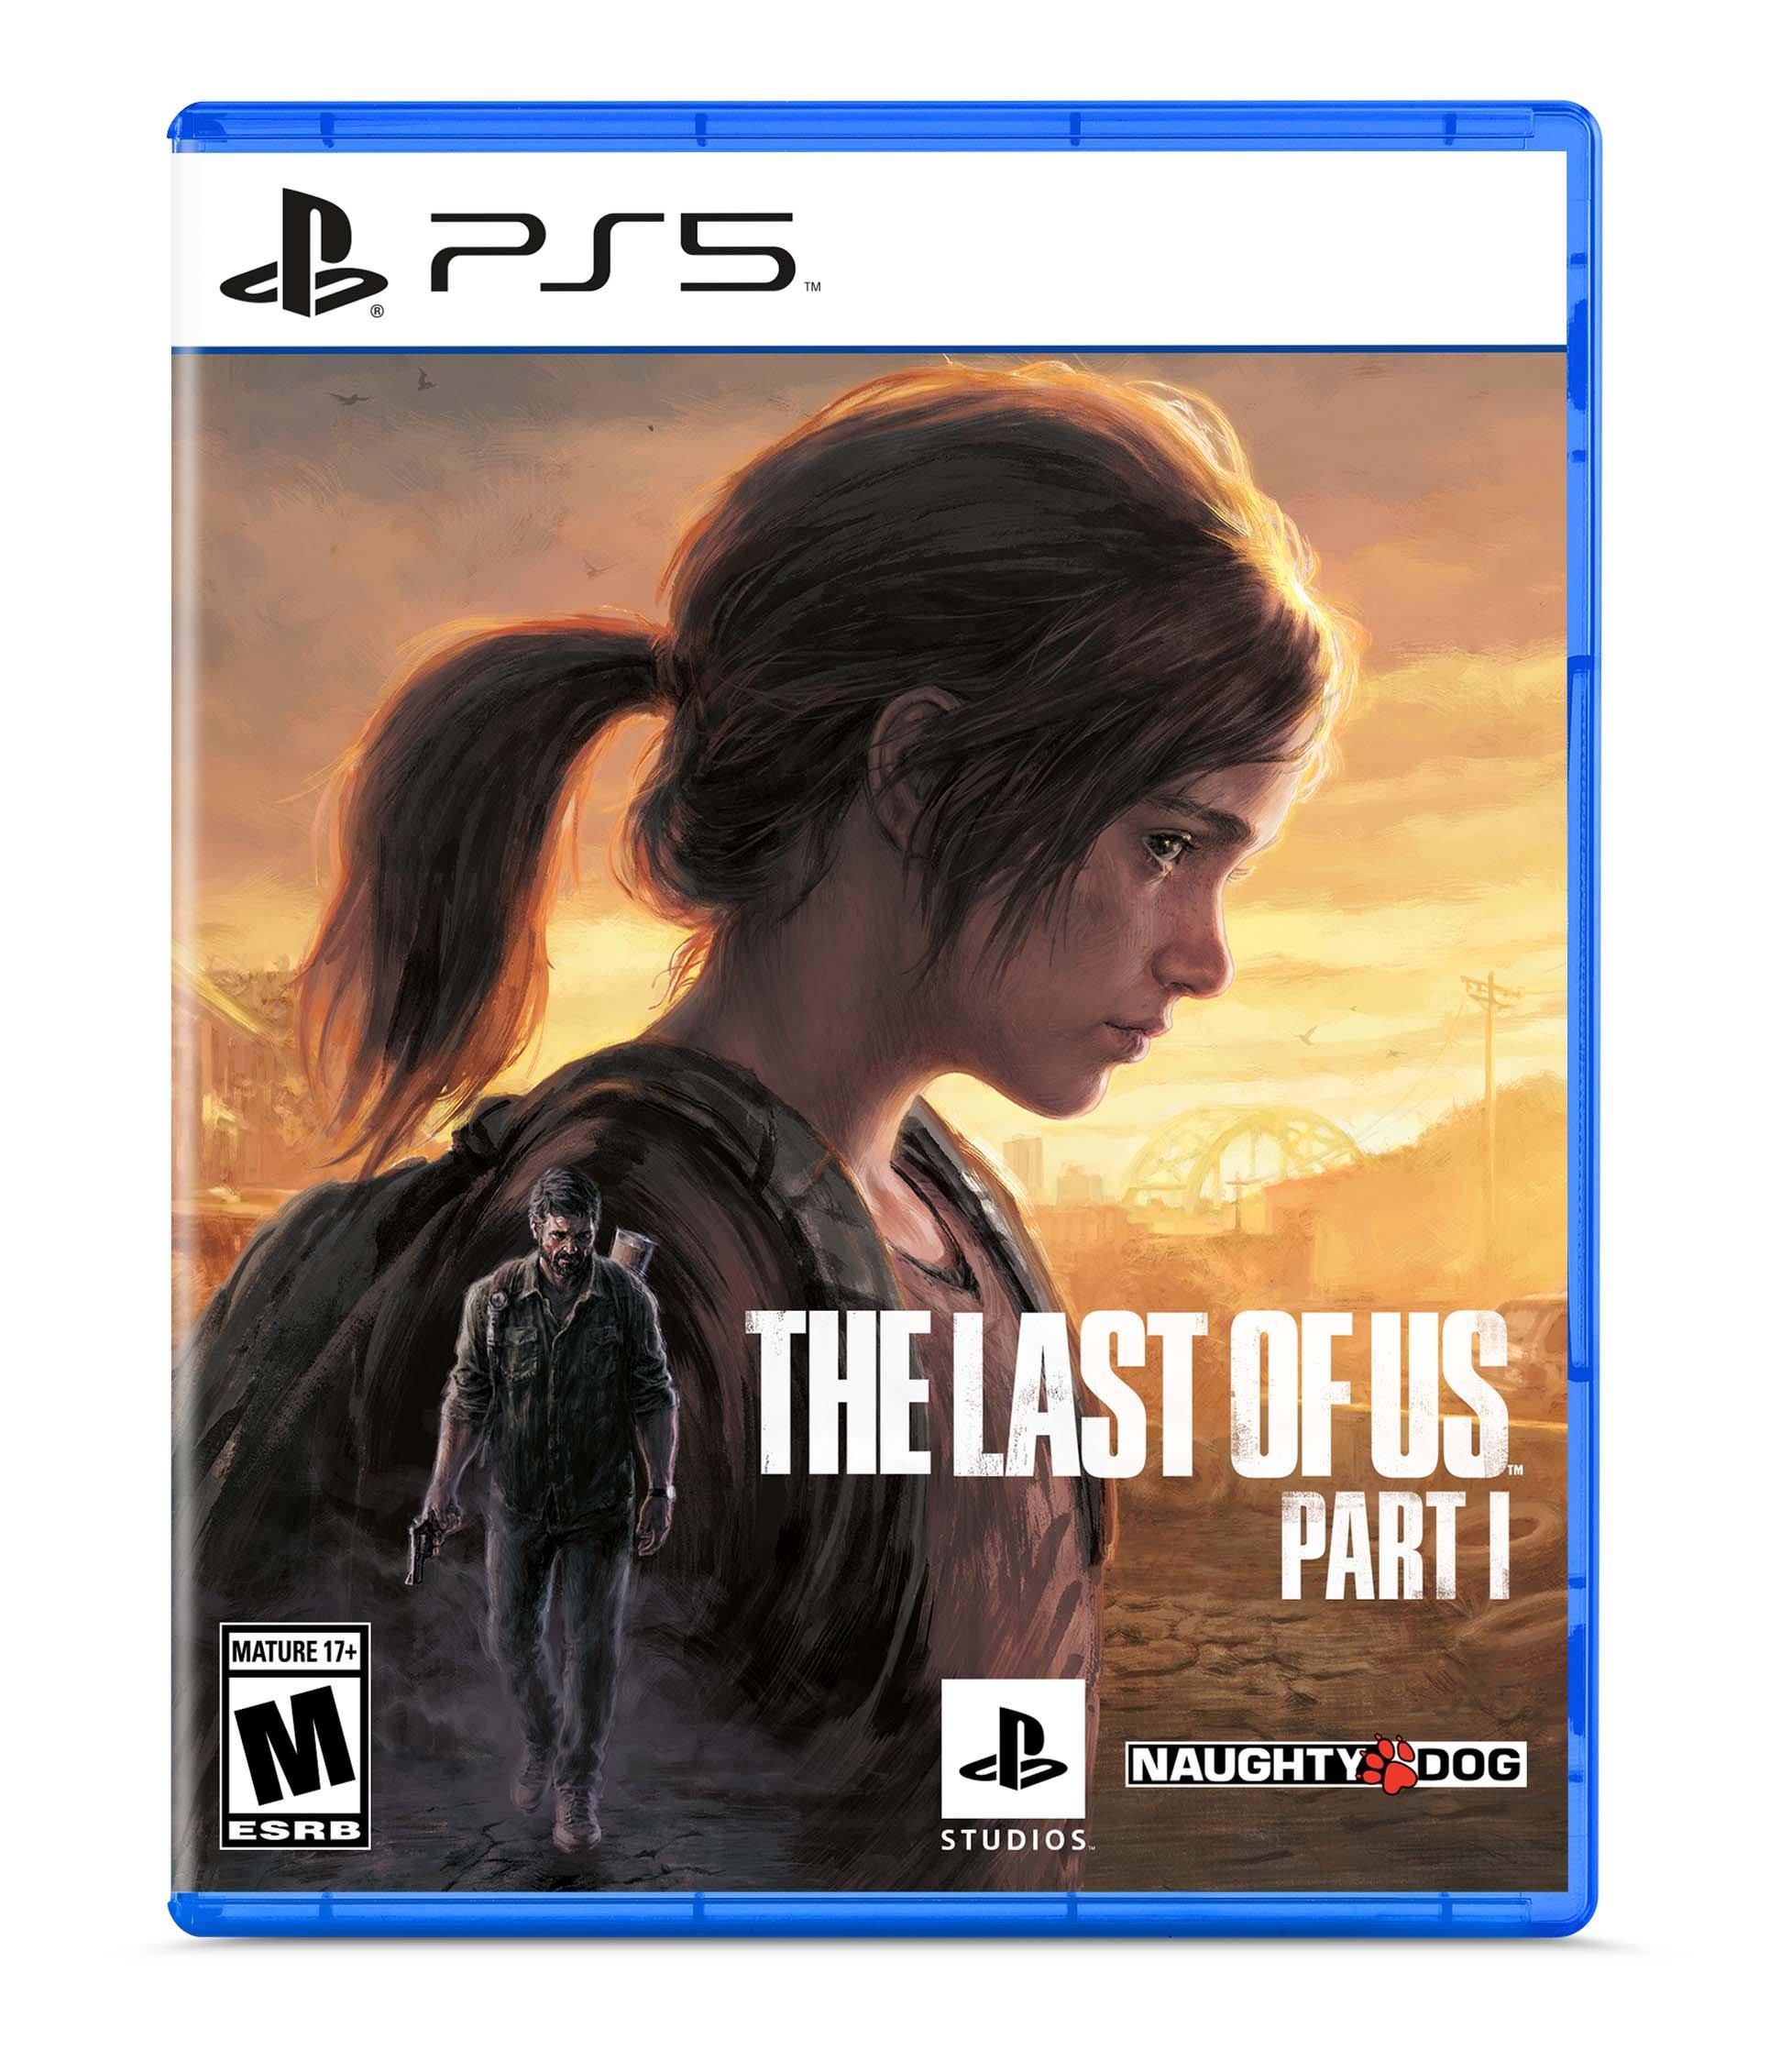 The Last of Us Part 1 Remake skins and costumes for Joel and Ellie